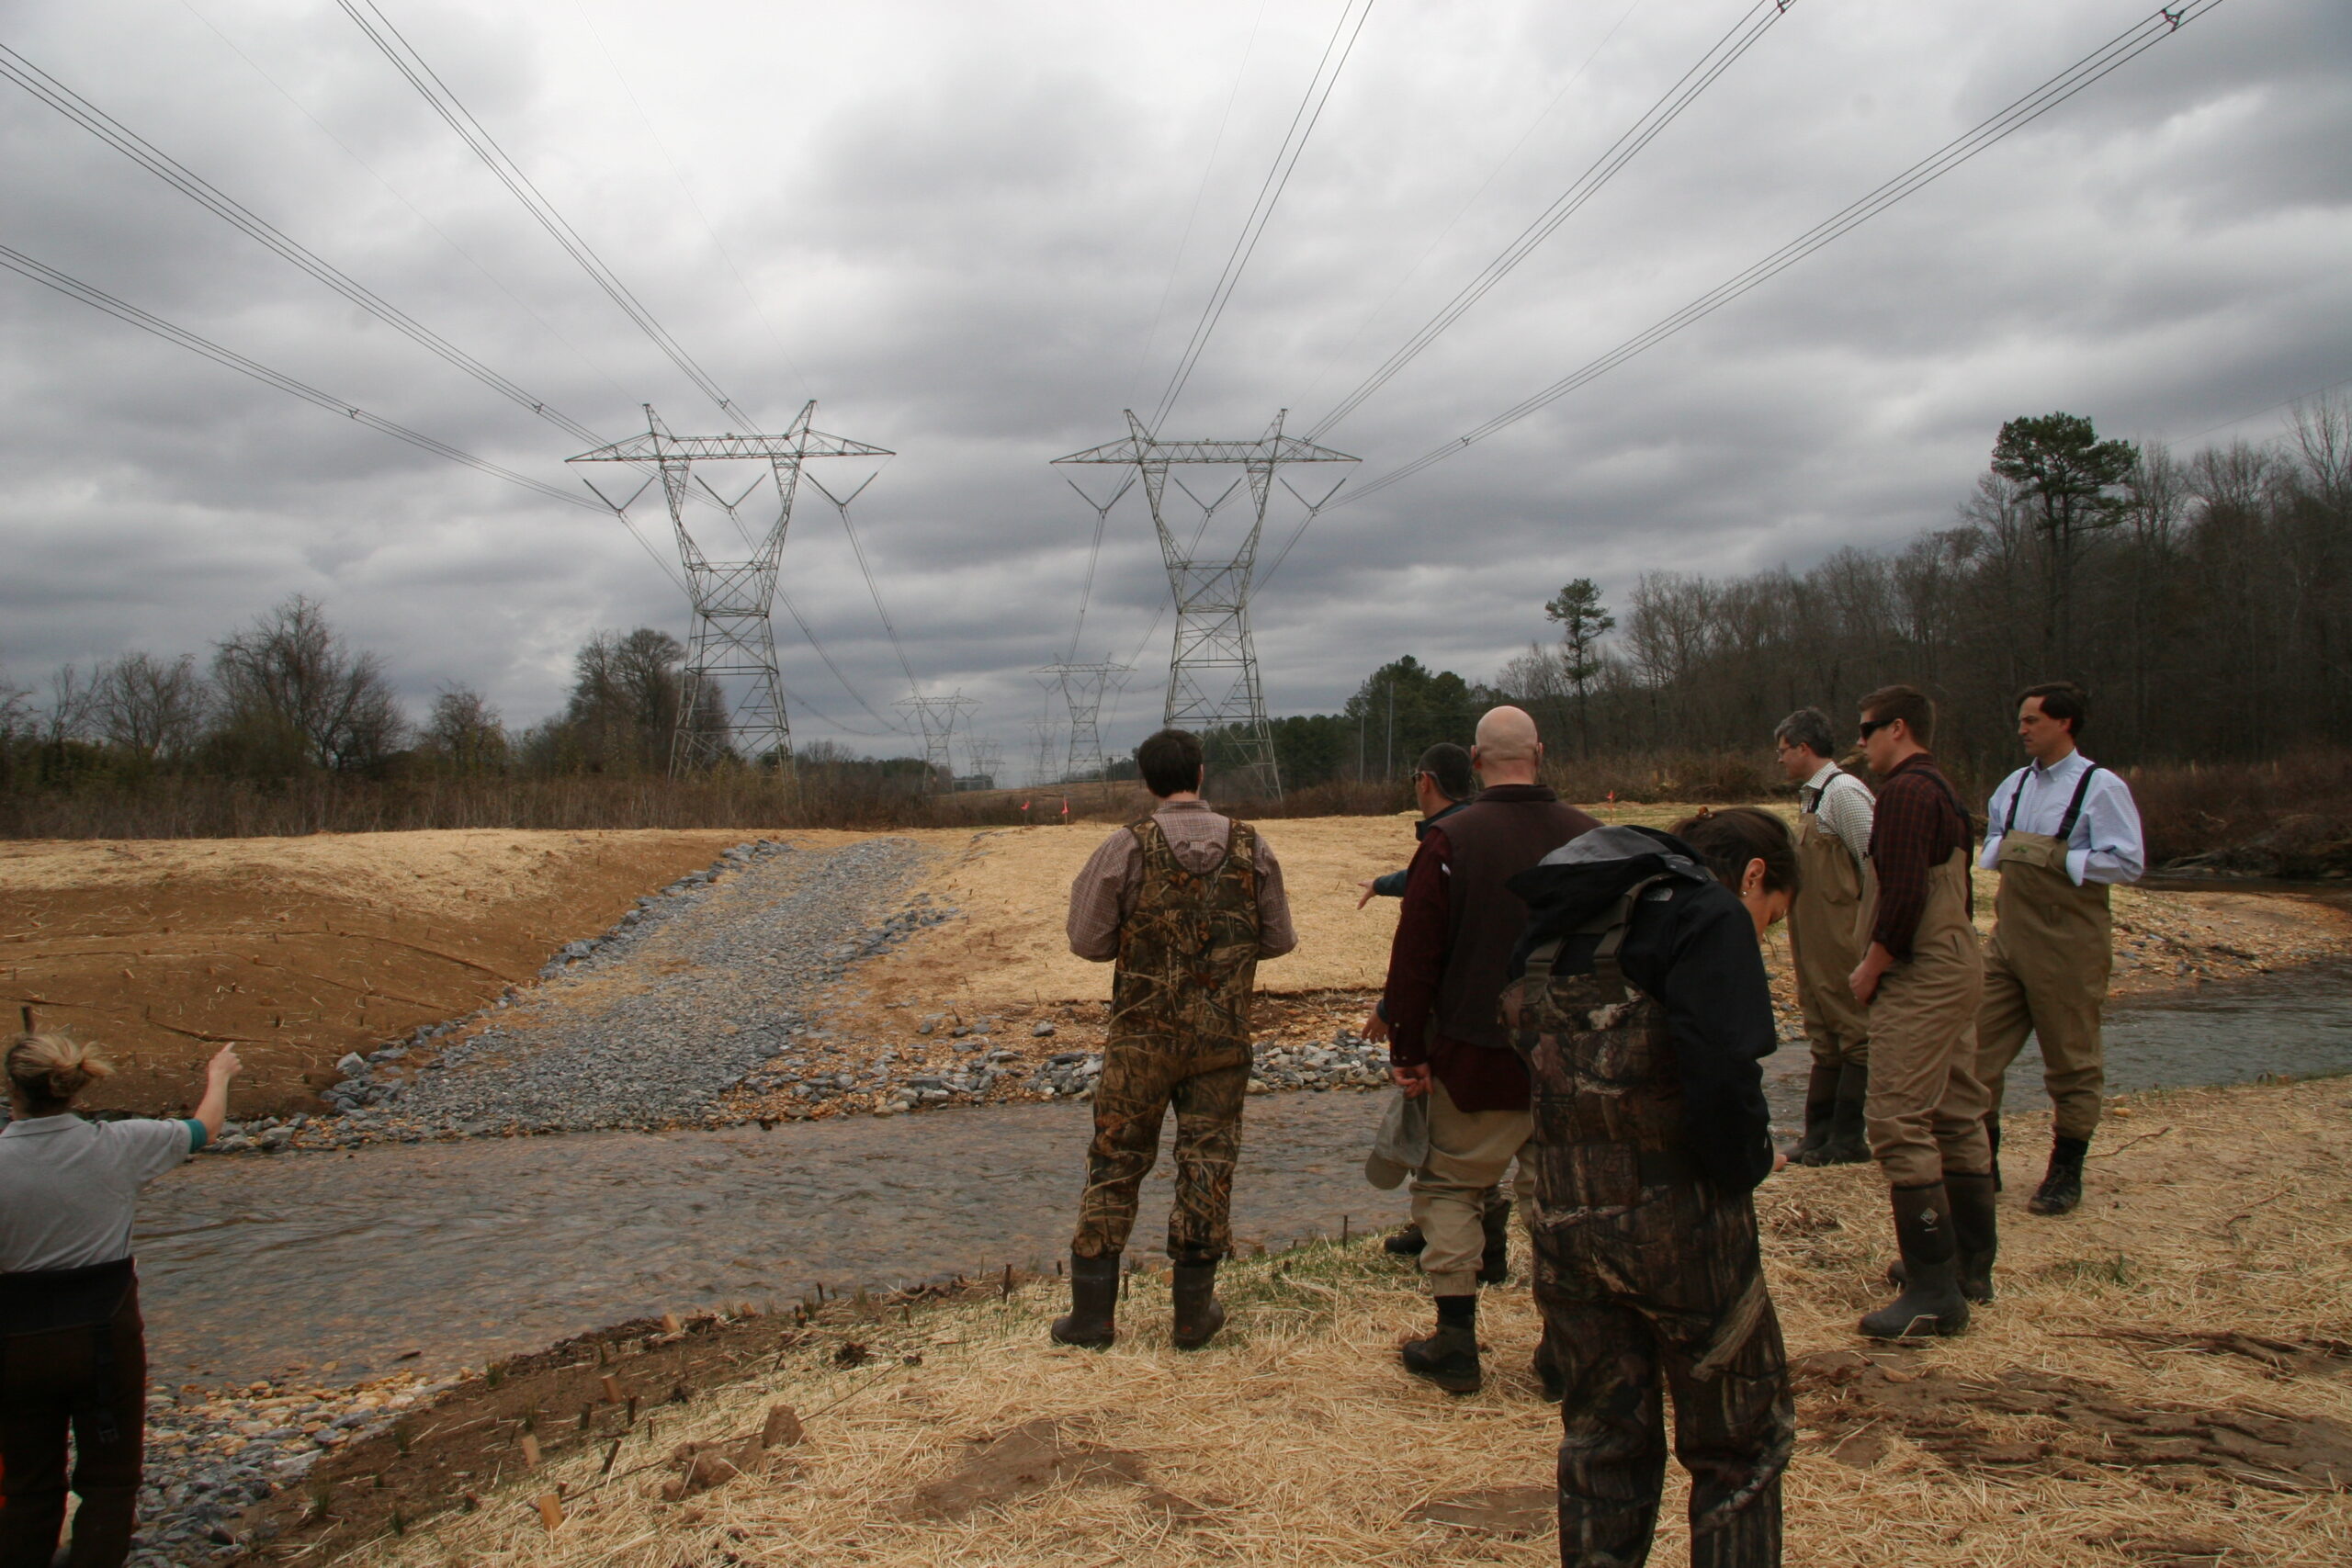 A group of people stand in front of a narrow river looking out onto tall transmission lines. Some are wearing camo gear and boots.